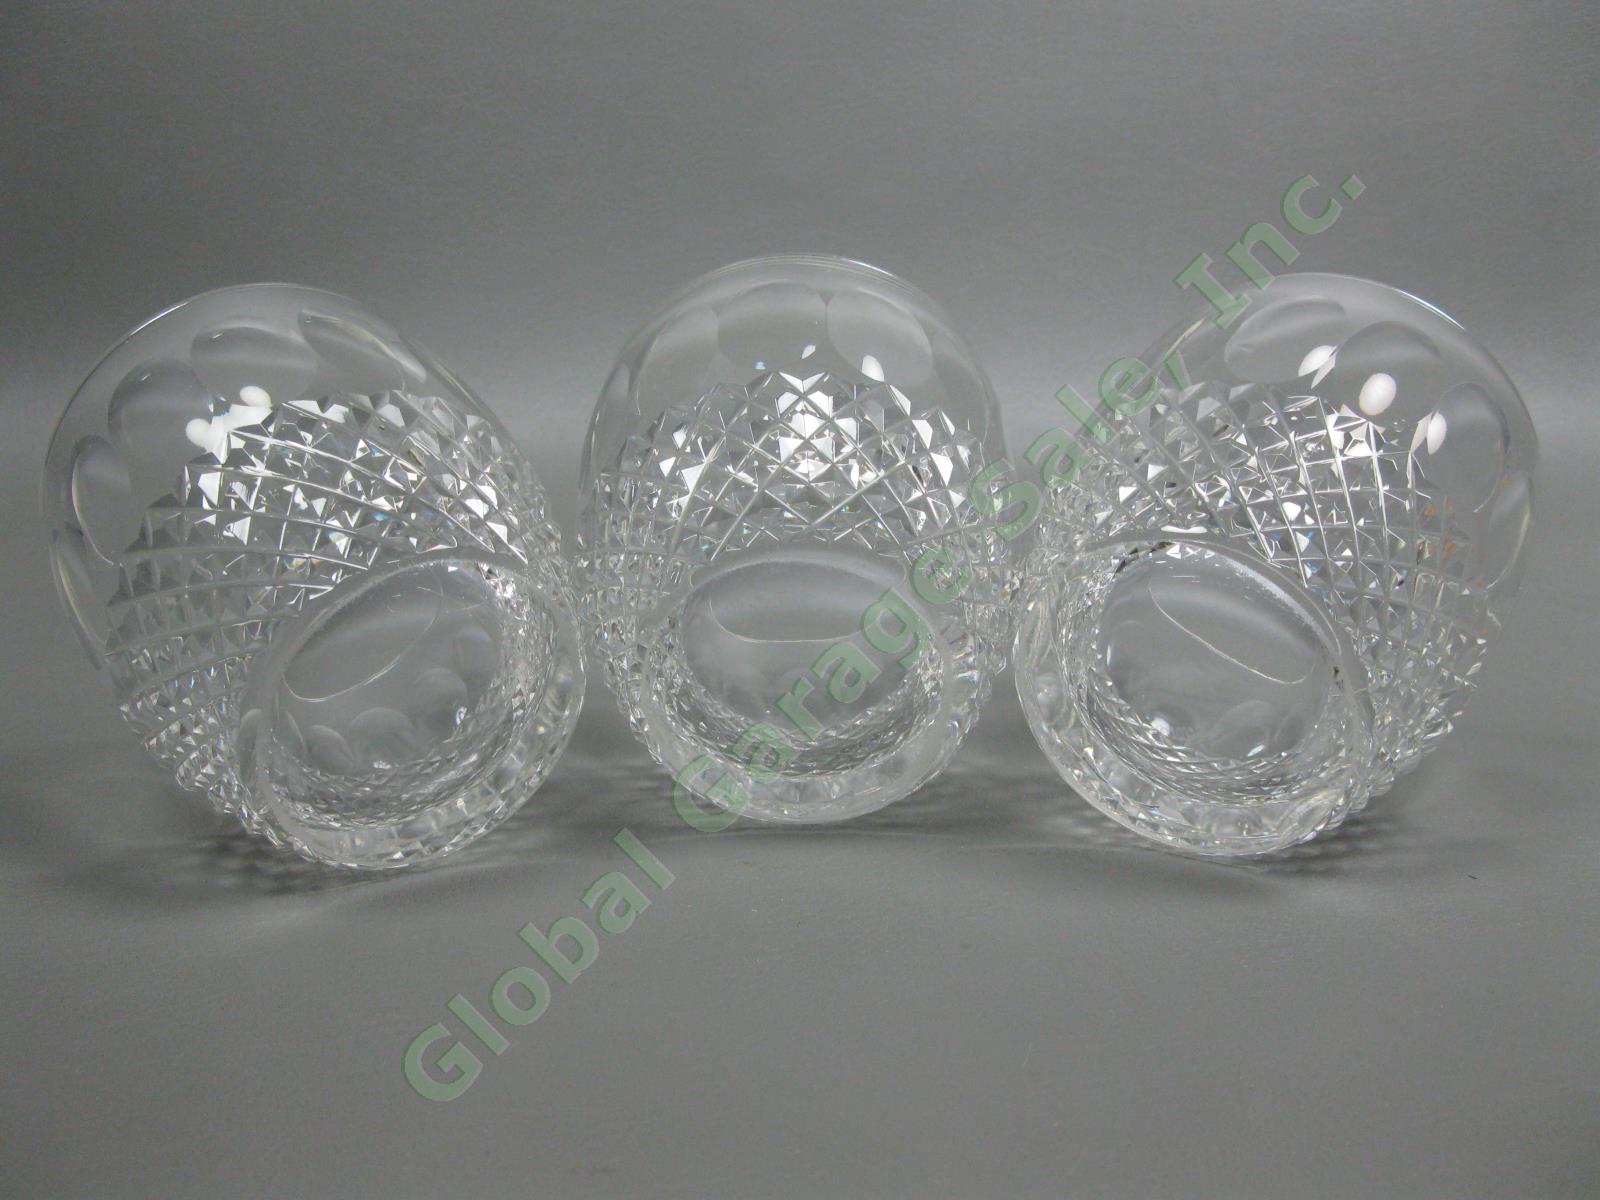 3 Waterford Crystal Colleen 9oz Water Tumbler Glasses Cut Hand-Blown Glass Set 4